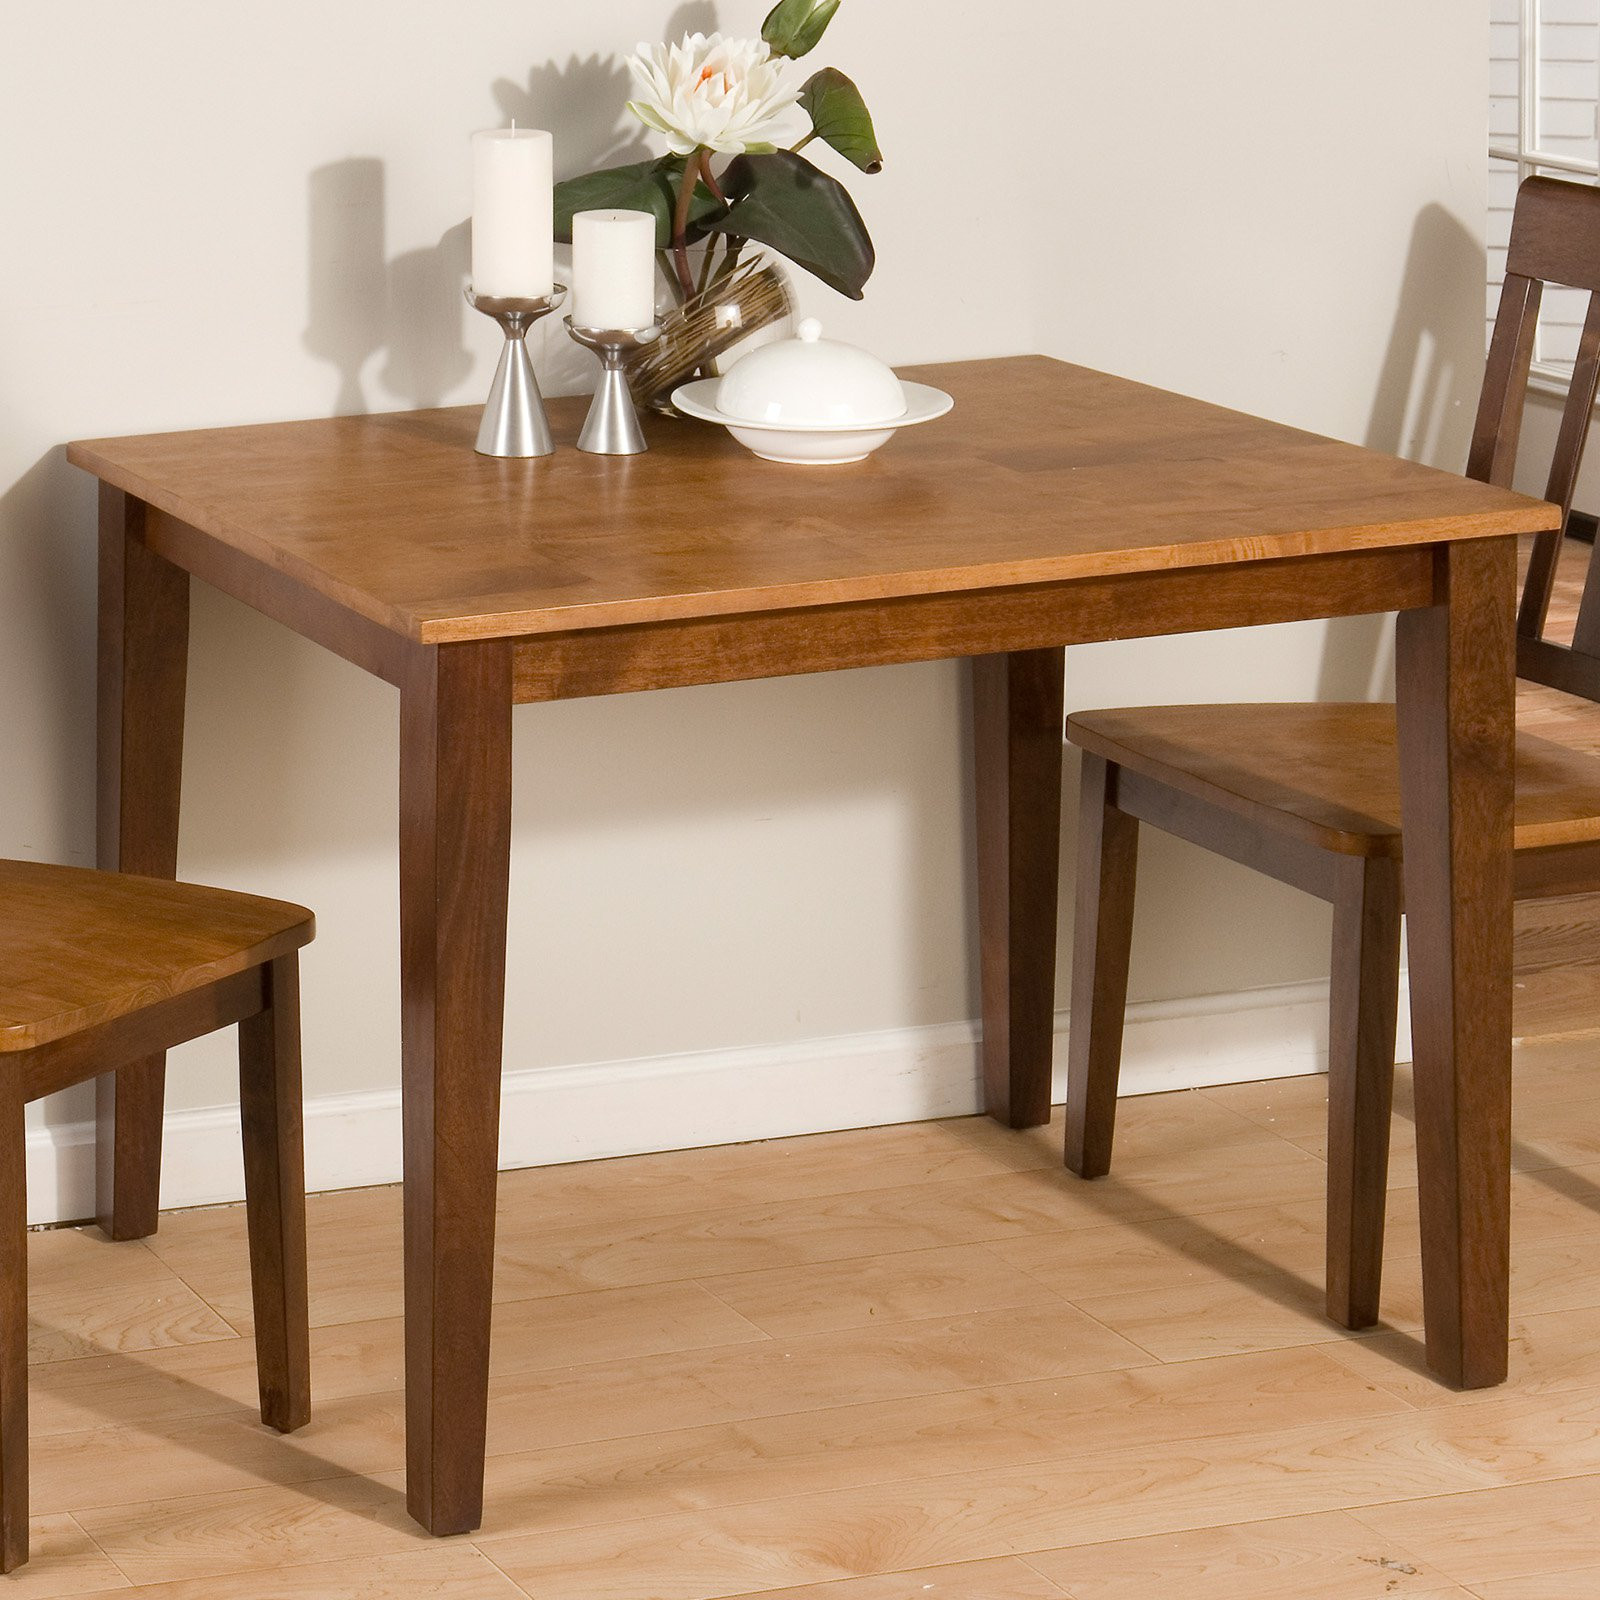 Small Rectangular Kitchen Table Sets
 Small Rectangular Kitchen Table – HomesFeed